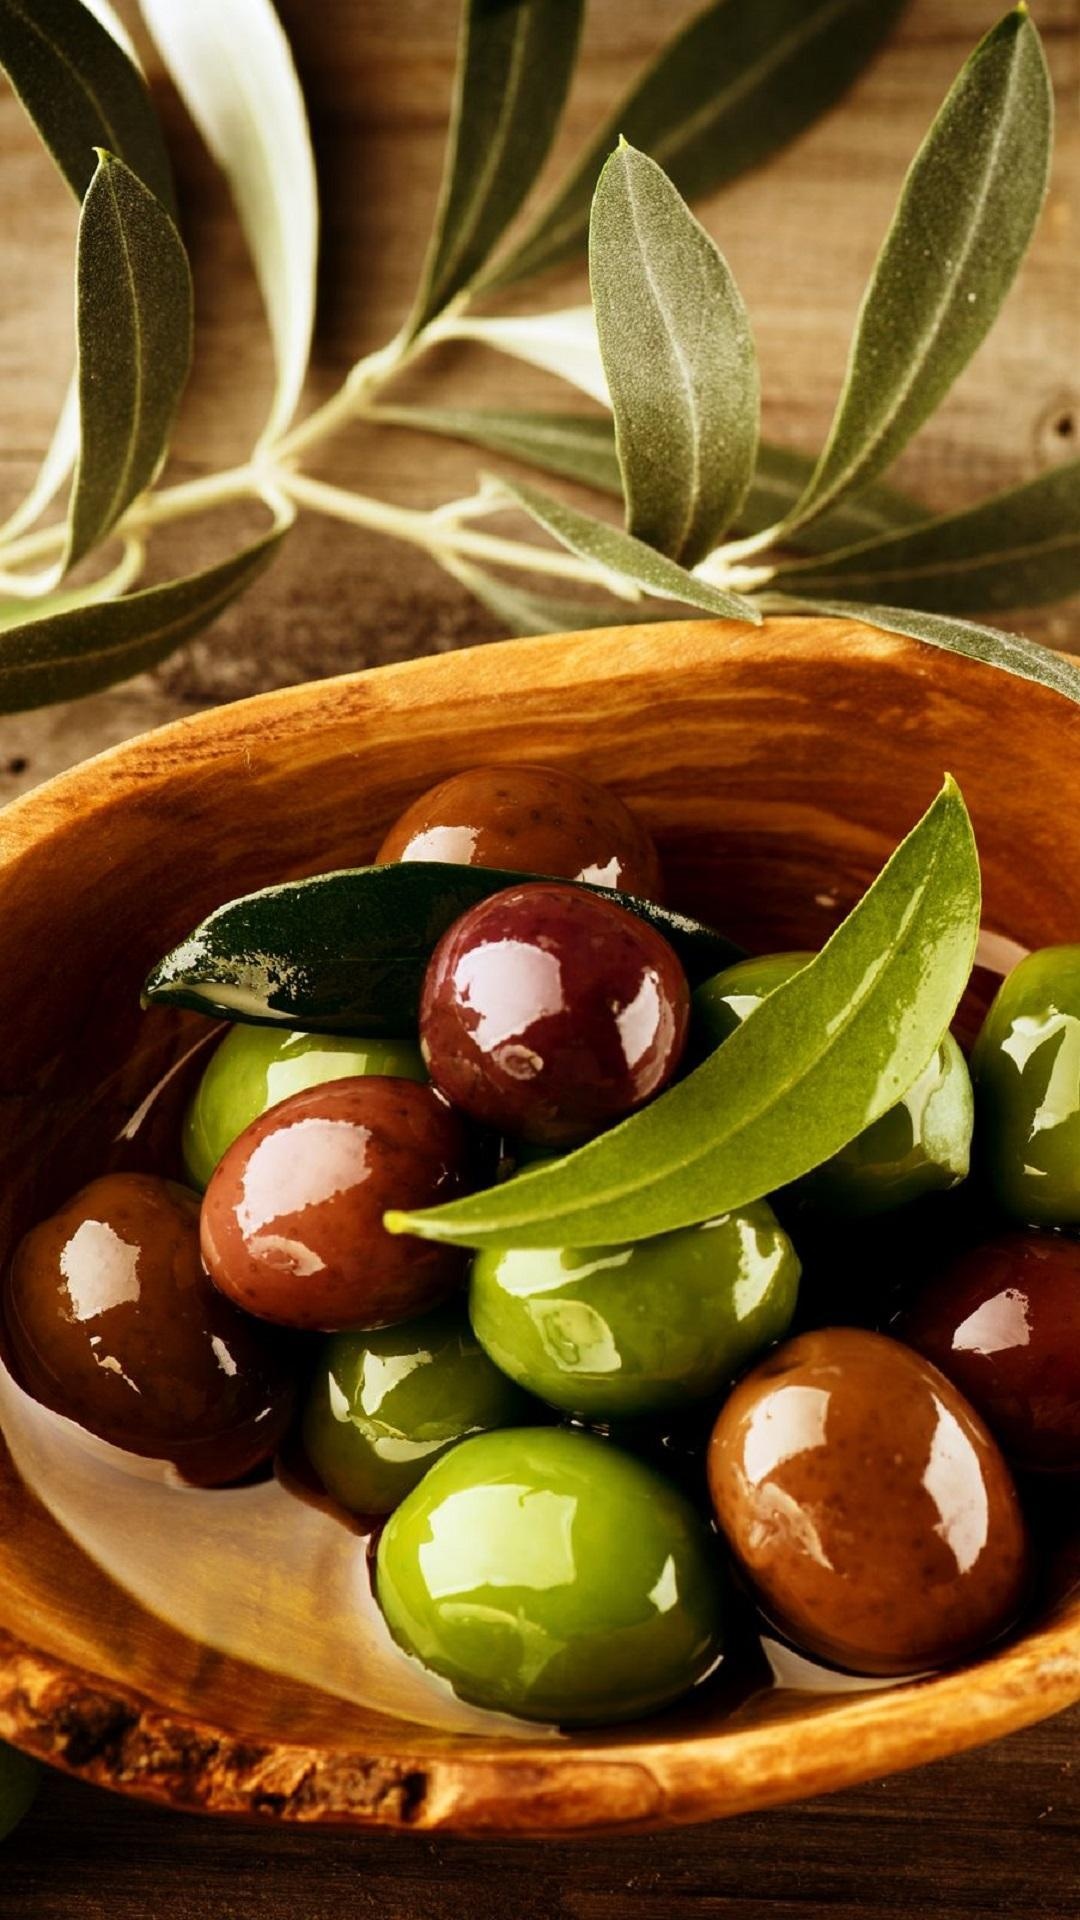 Olive: The fruit is a small drupe with a single seed inside, also known as a pit or stone. 1080x1920 Full HD Wallpaper.